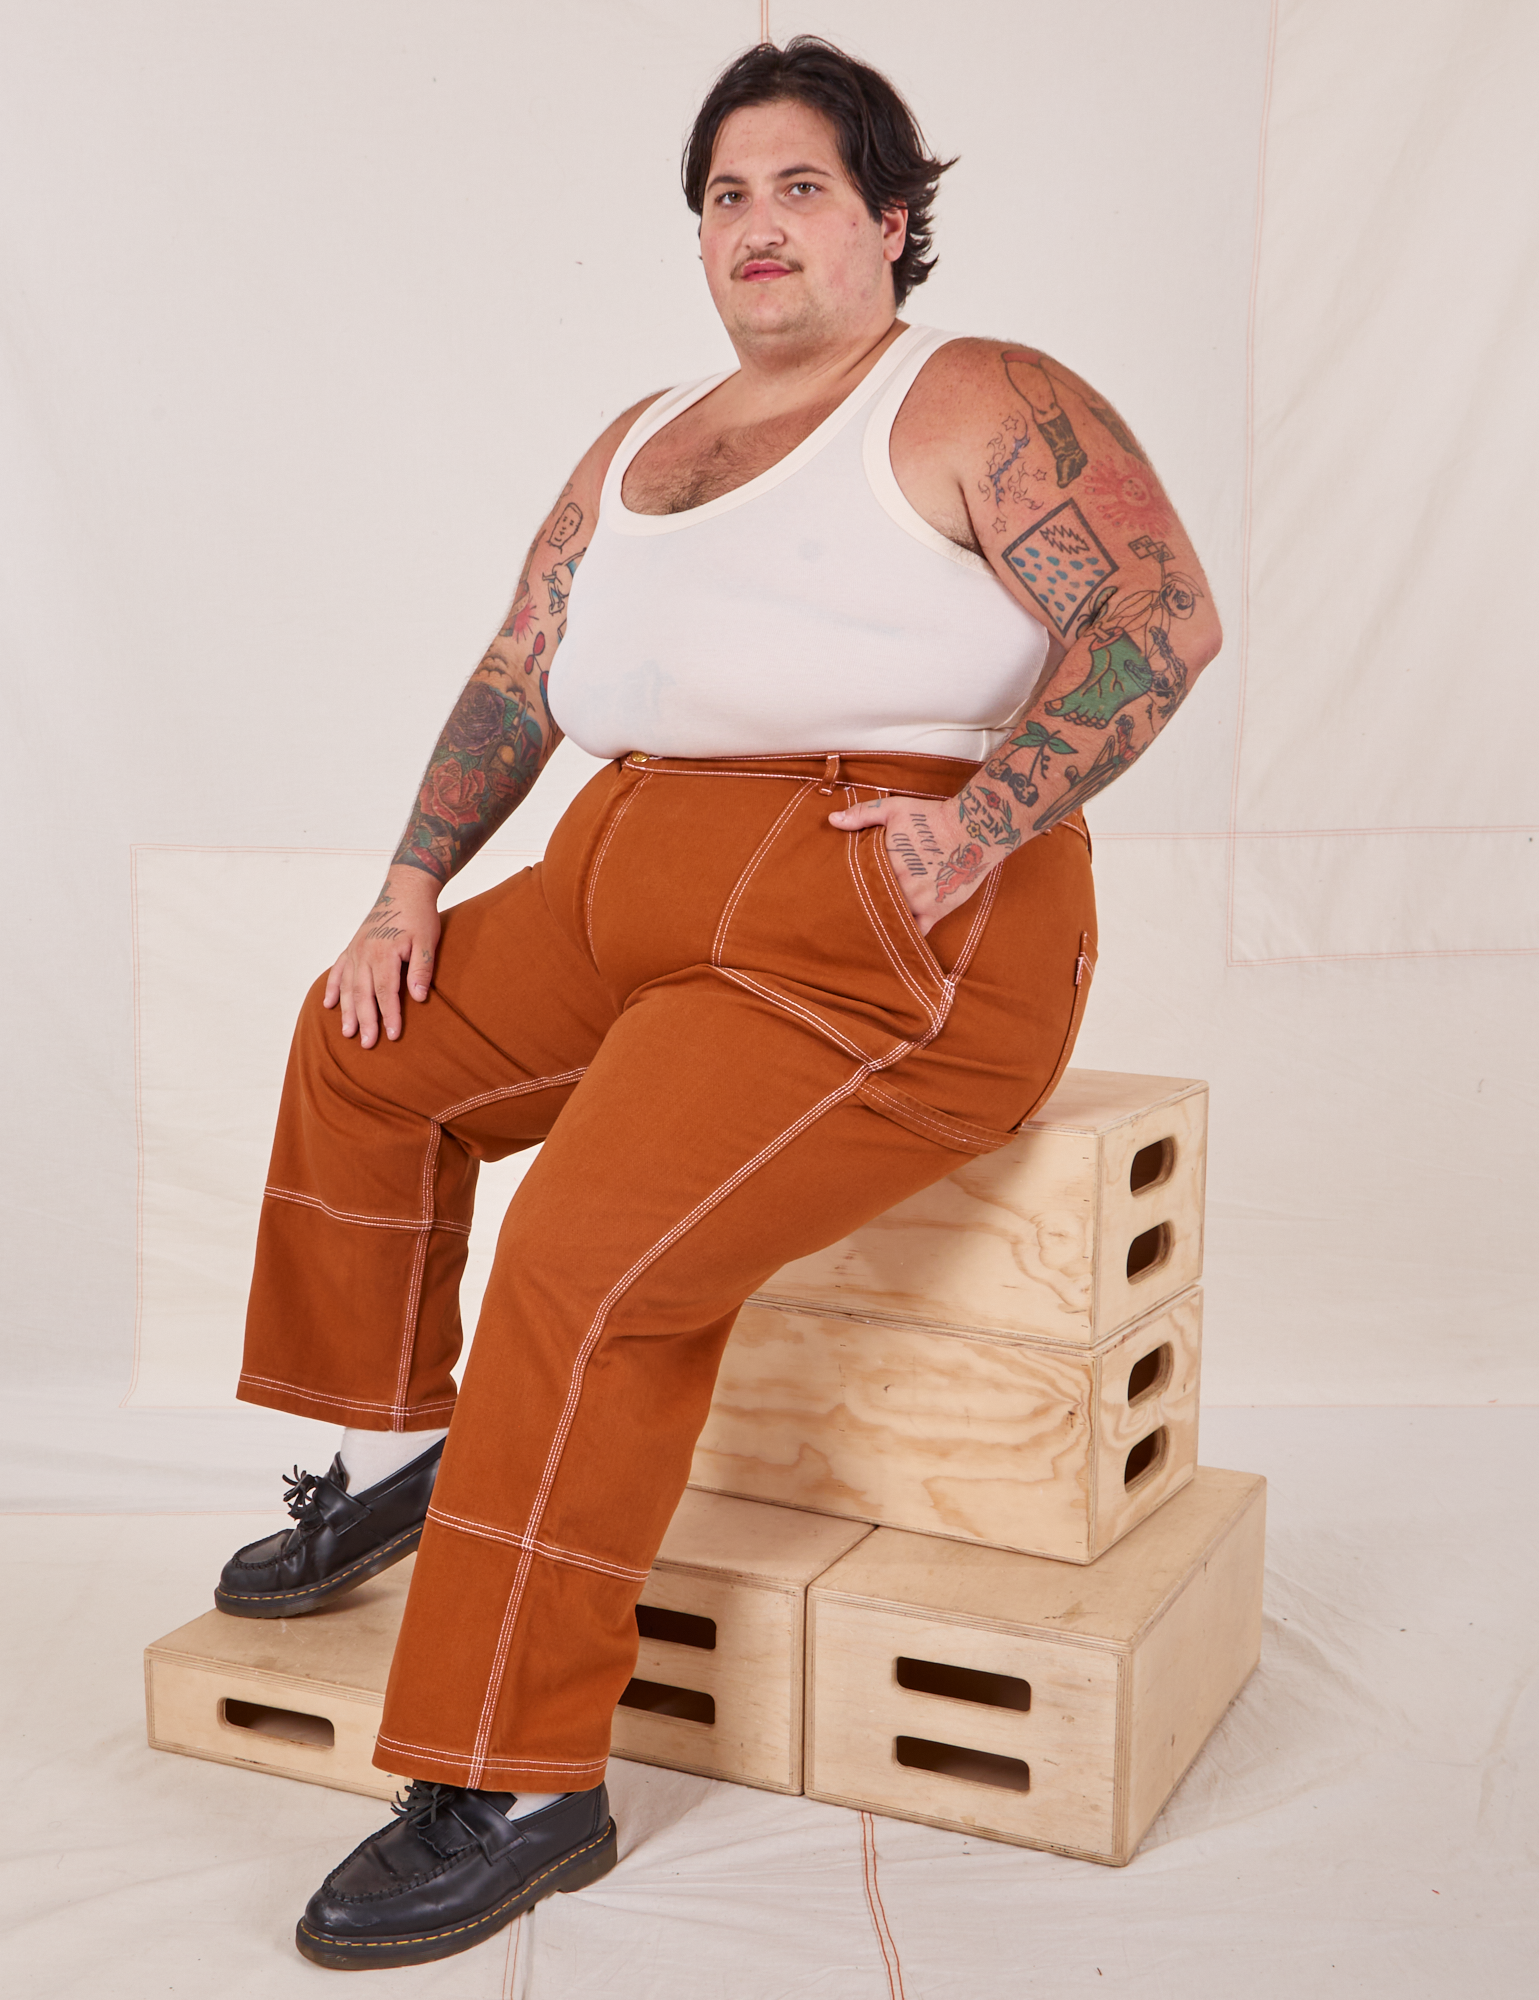 Sam is wearing Carpenter Jeans in Burnt Terracotta and Tank Top in vintage tee off-white. They are sitting on a stack of wooden crates.